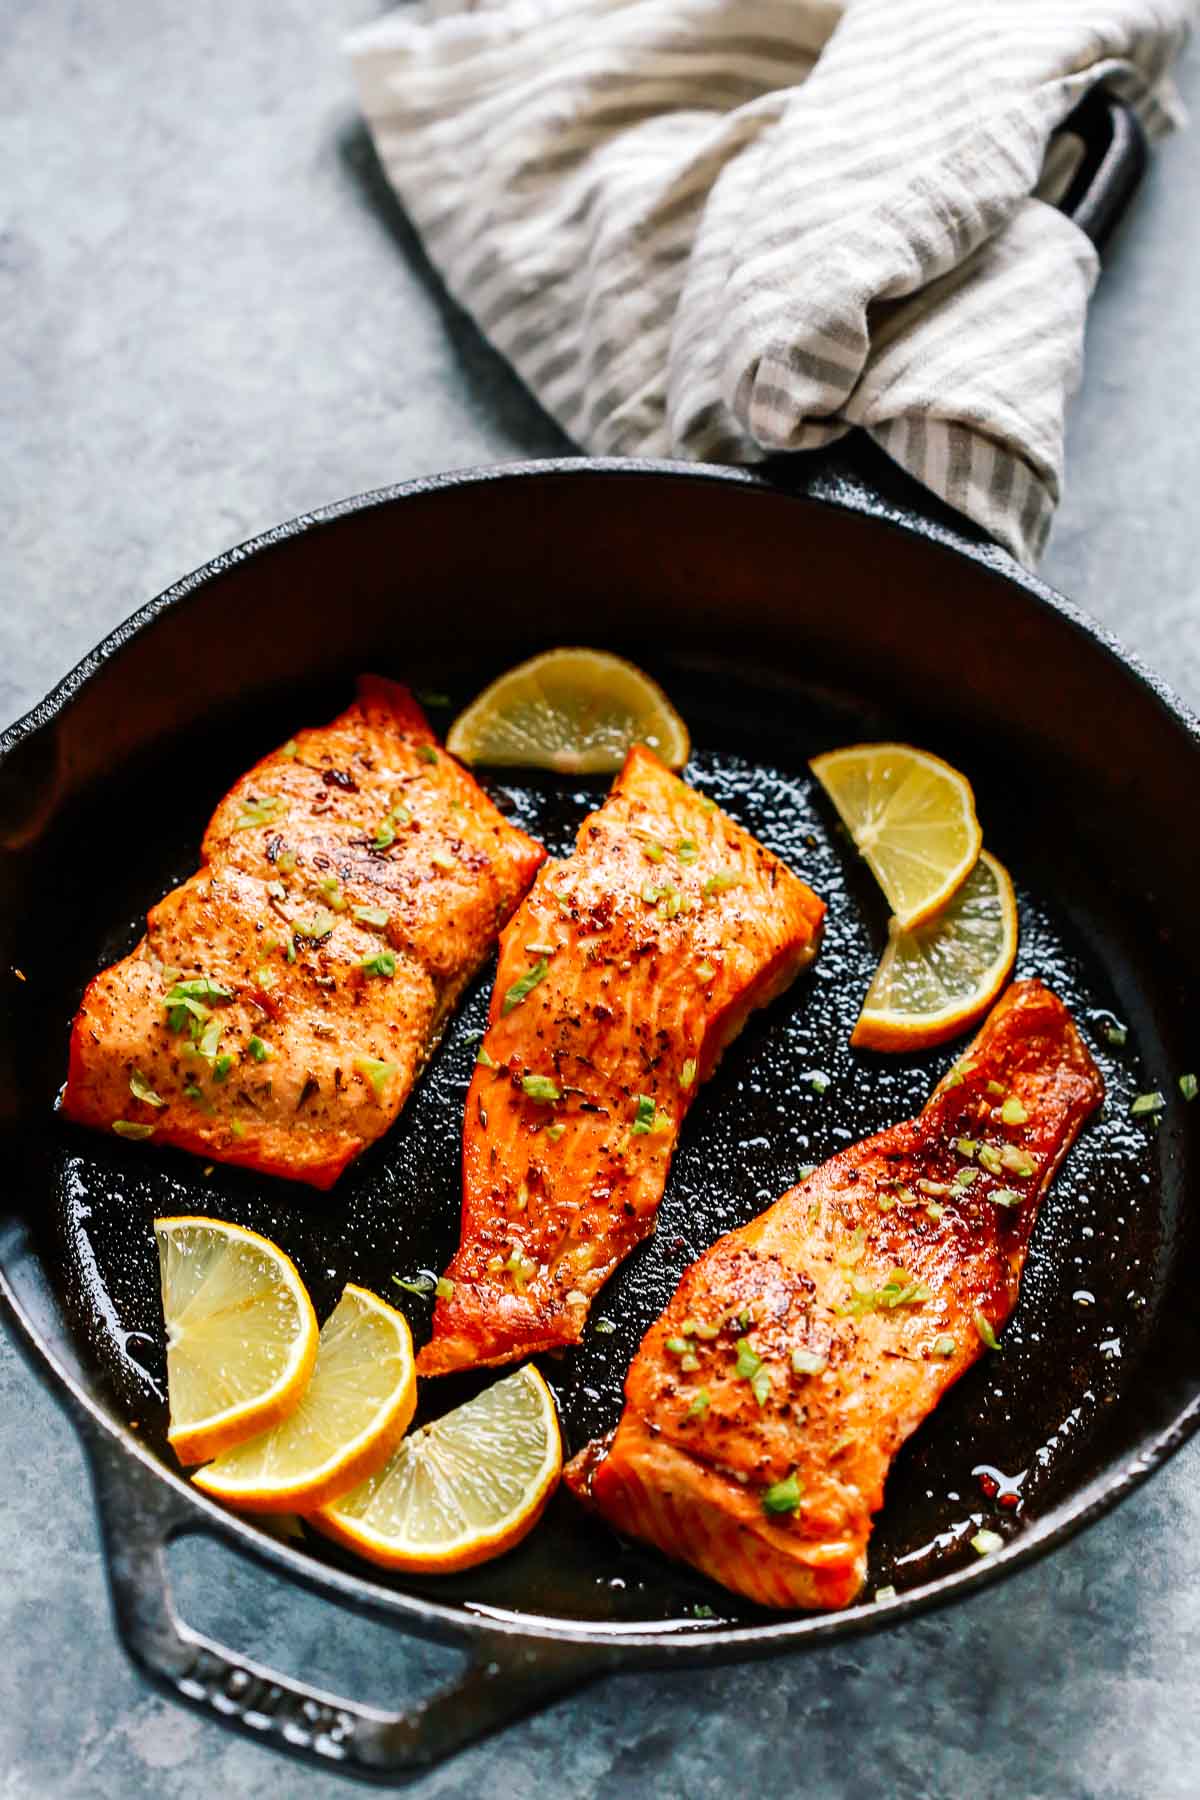 A bowl of food, with Blackened salmon